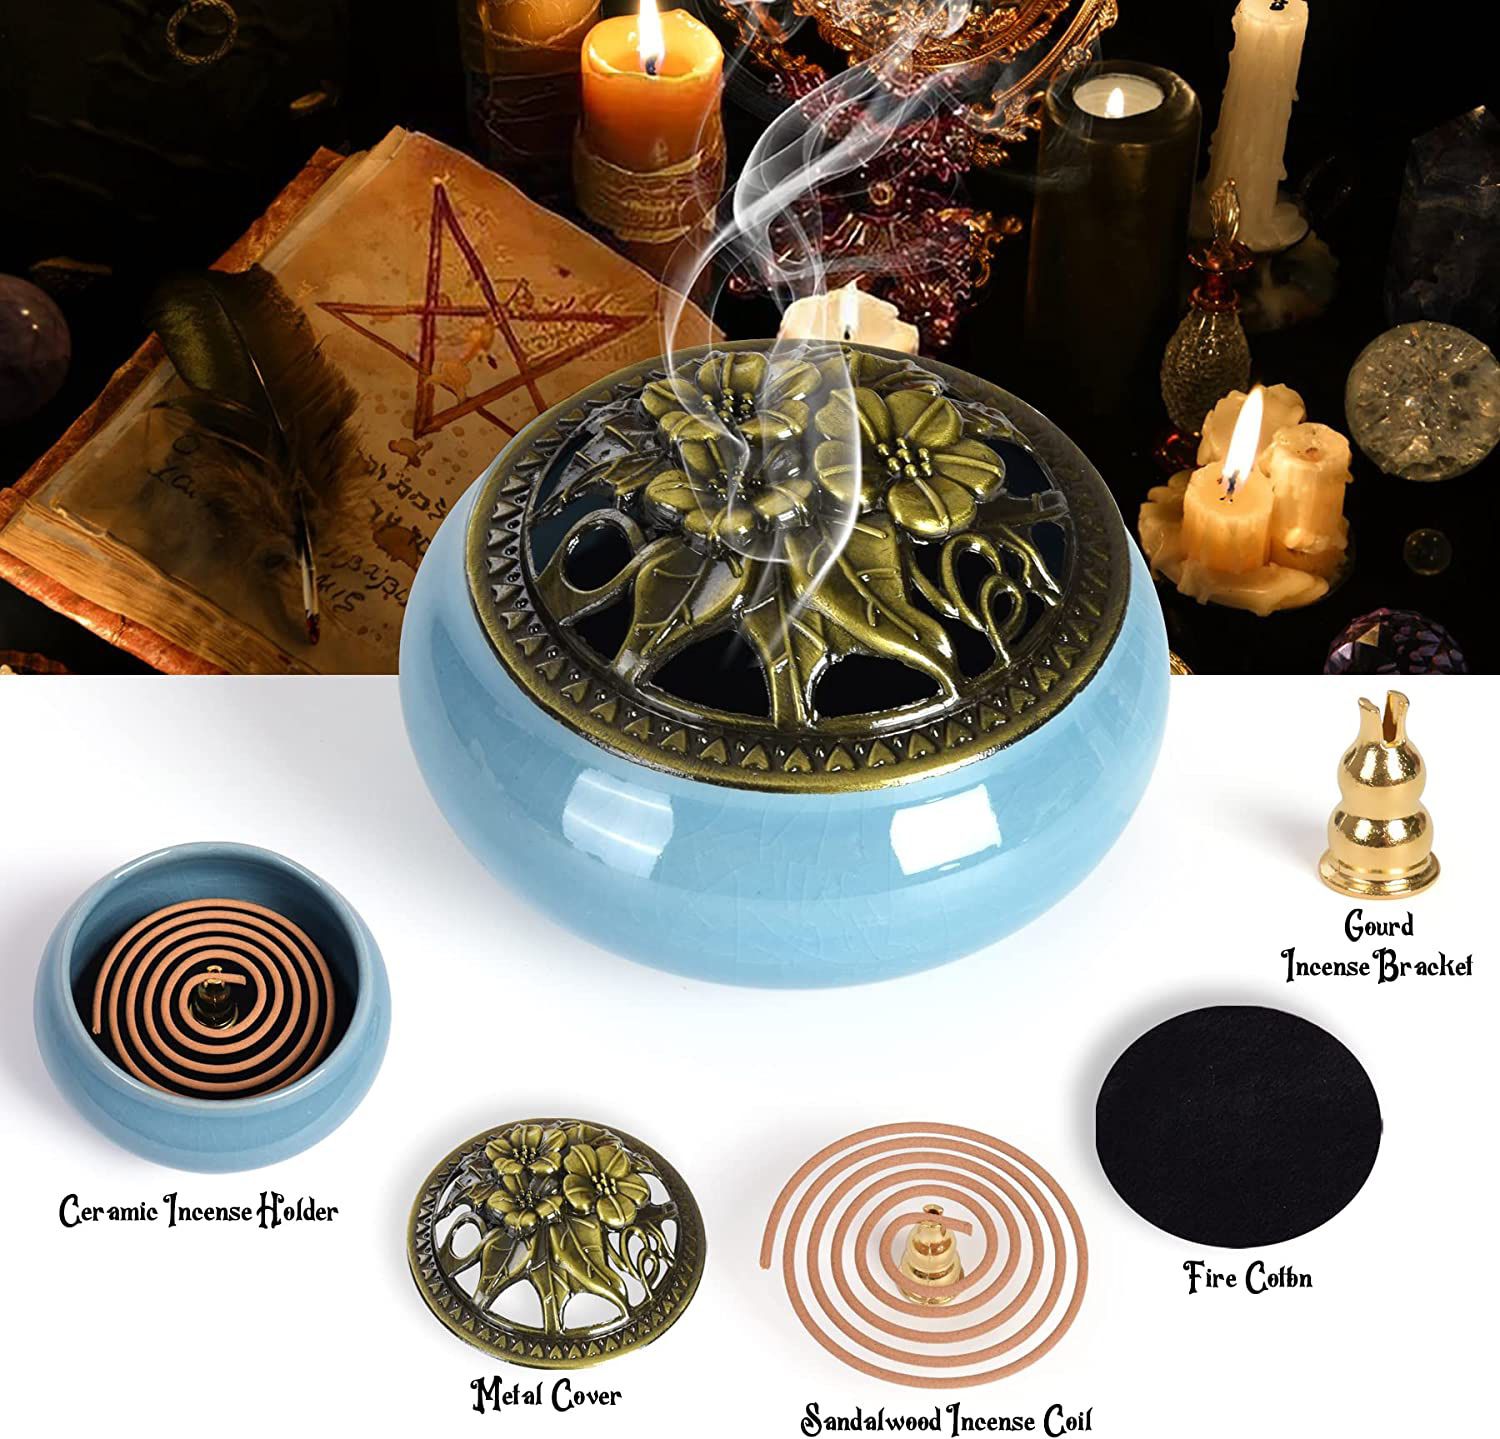 Dried Herbs for Witchcrafts with Ceramic Incense Burner,Witchcrafts Supplies Kits,Incense Holder for Sticks or Cone,Ruicnte Beginner Herb Witchcrafts 